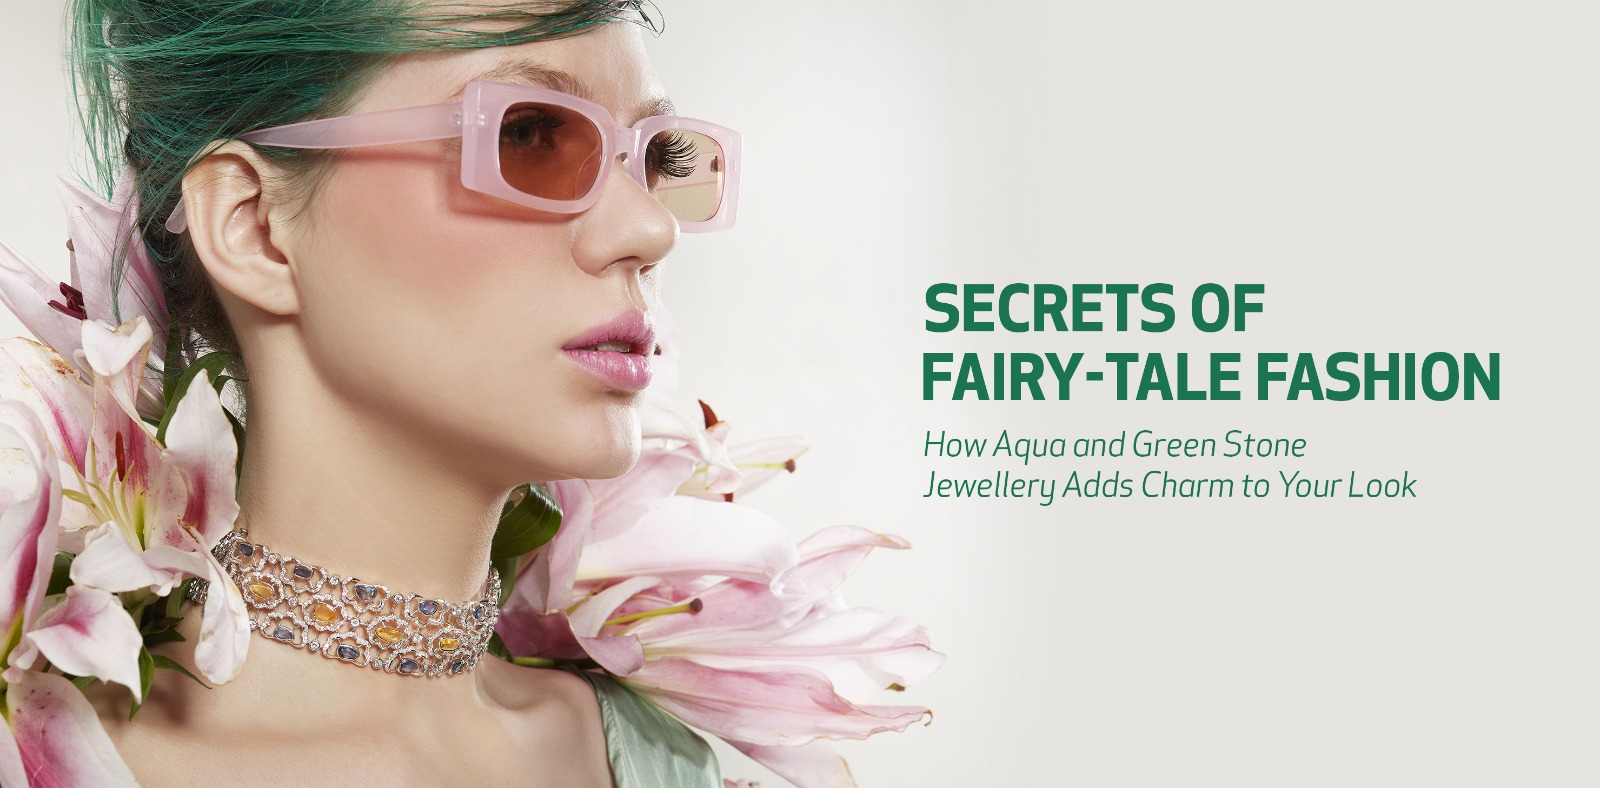 Secrets of Fairy-tale Fashion: How Aqua and Green Stone Jewellery Adds Charm to Your Look